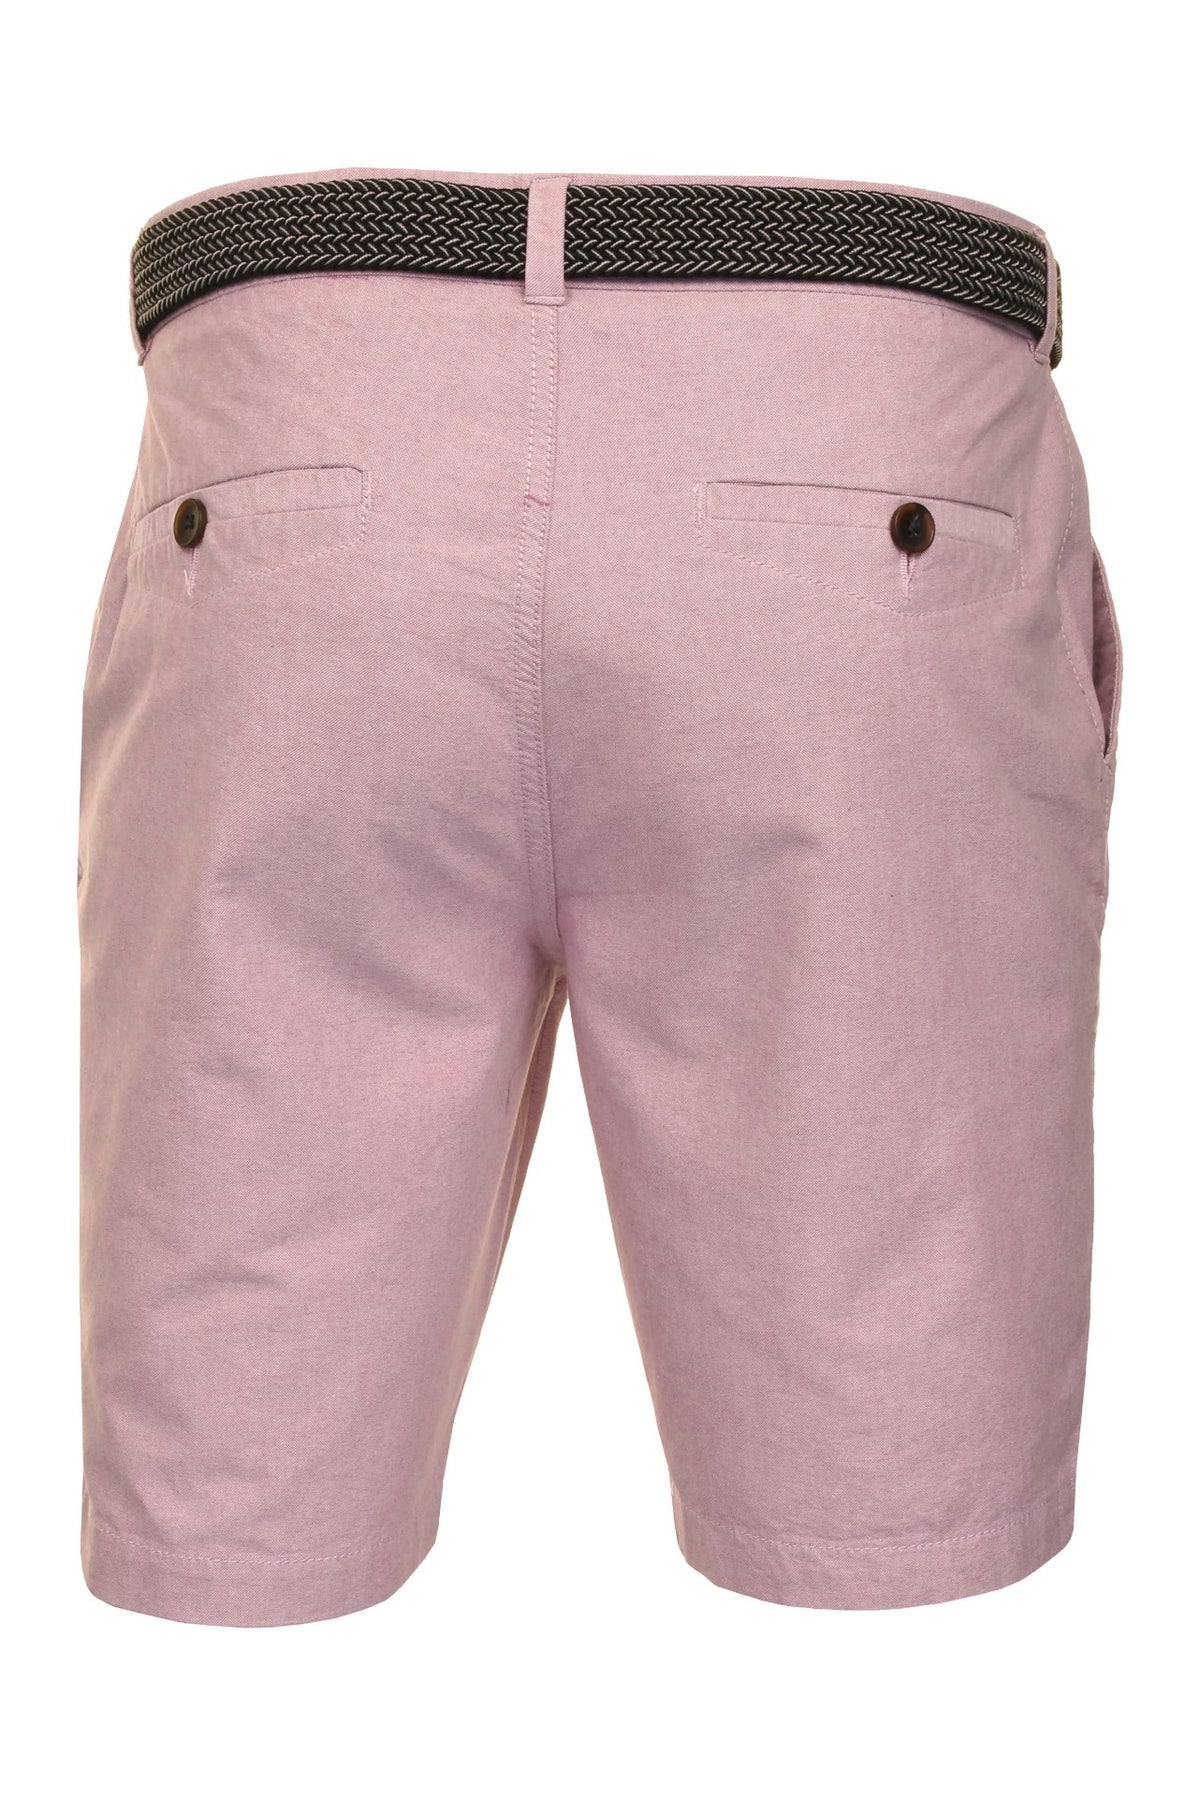 Xact Mens Oxford Chino Shorts with Belt, 03, Xsrt1029, Oxford Pink